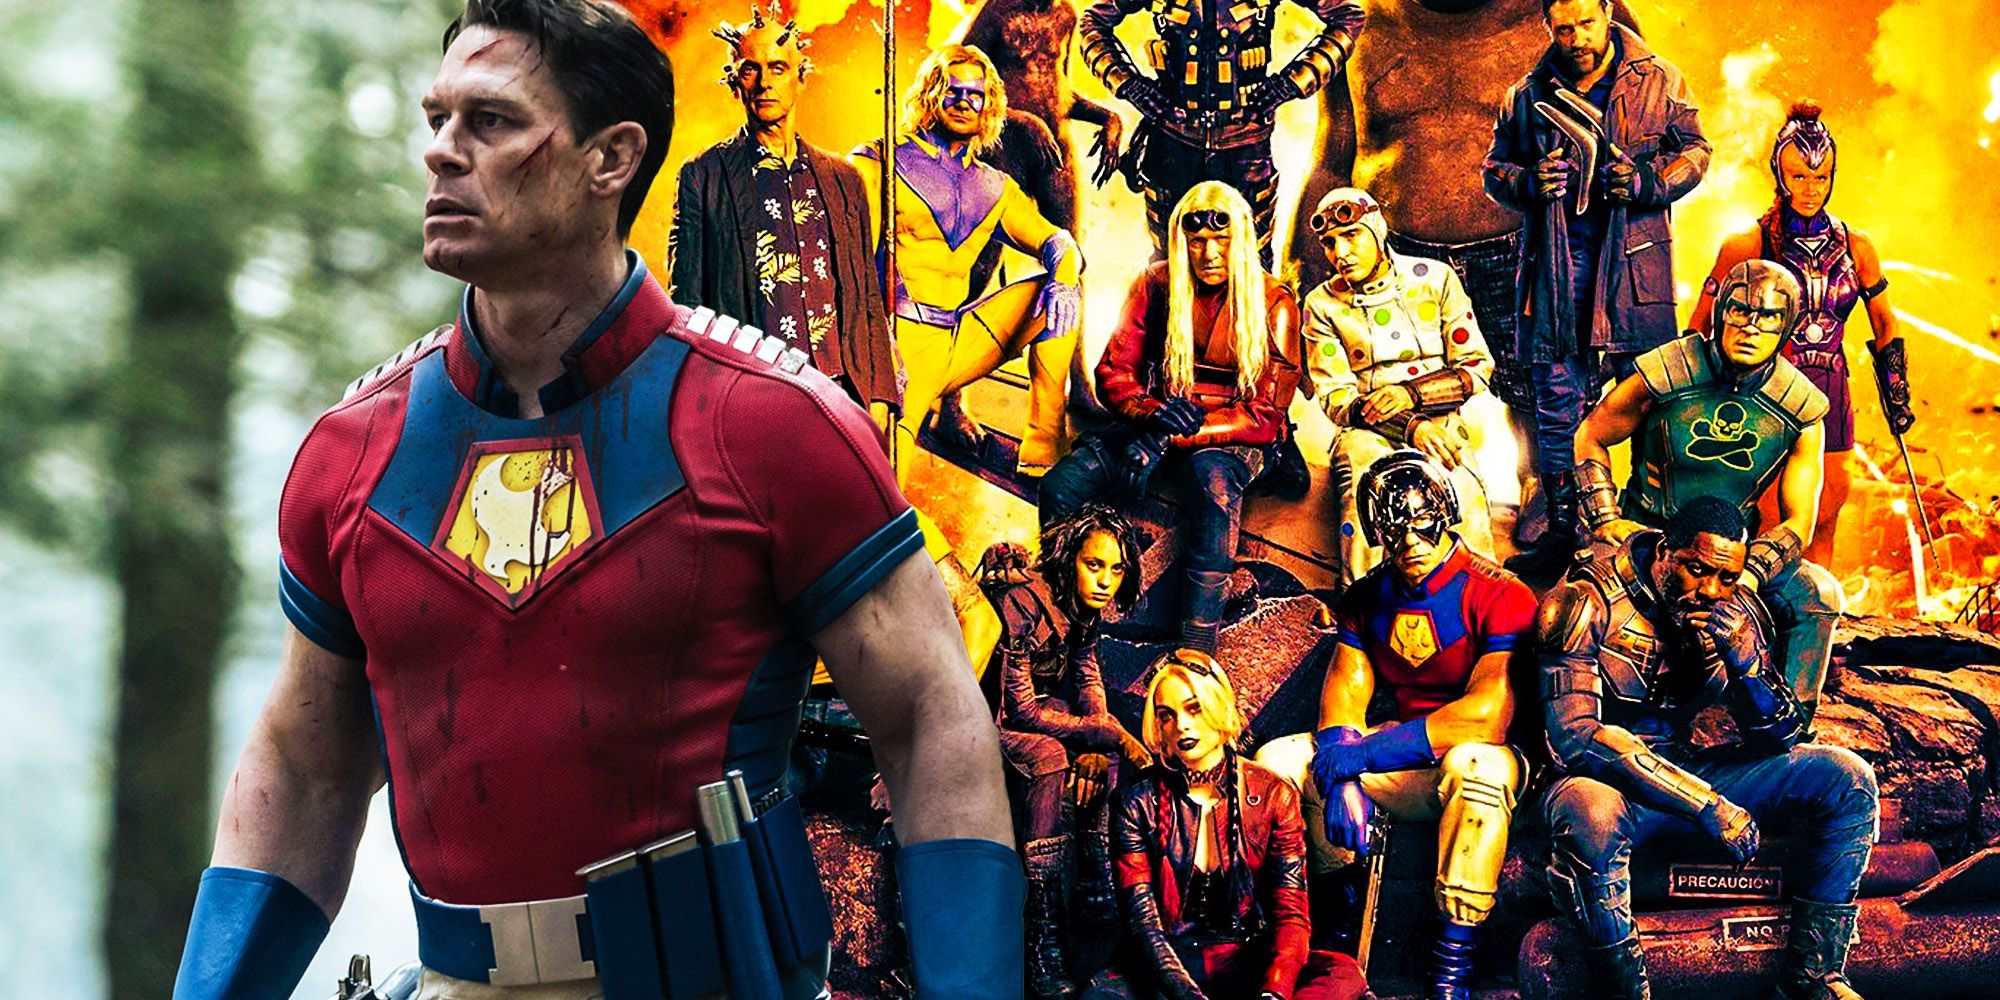 John Cena Peacemaker just made the suicide squad 3 impossible